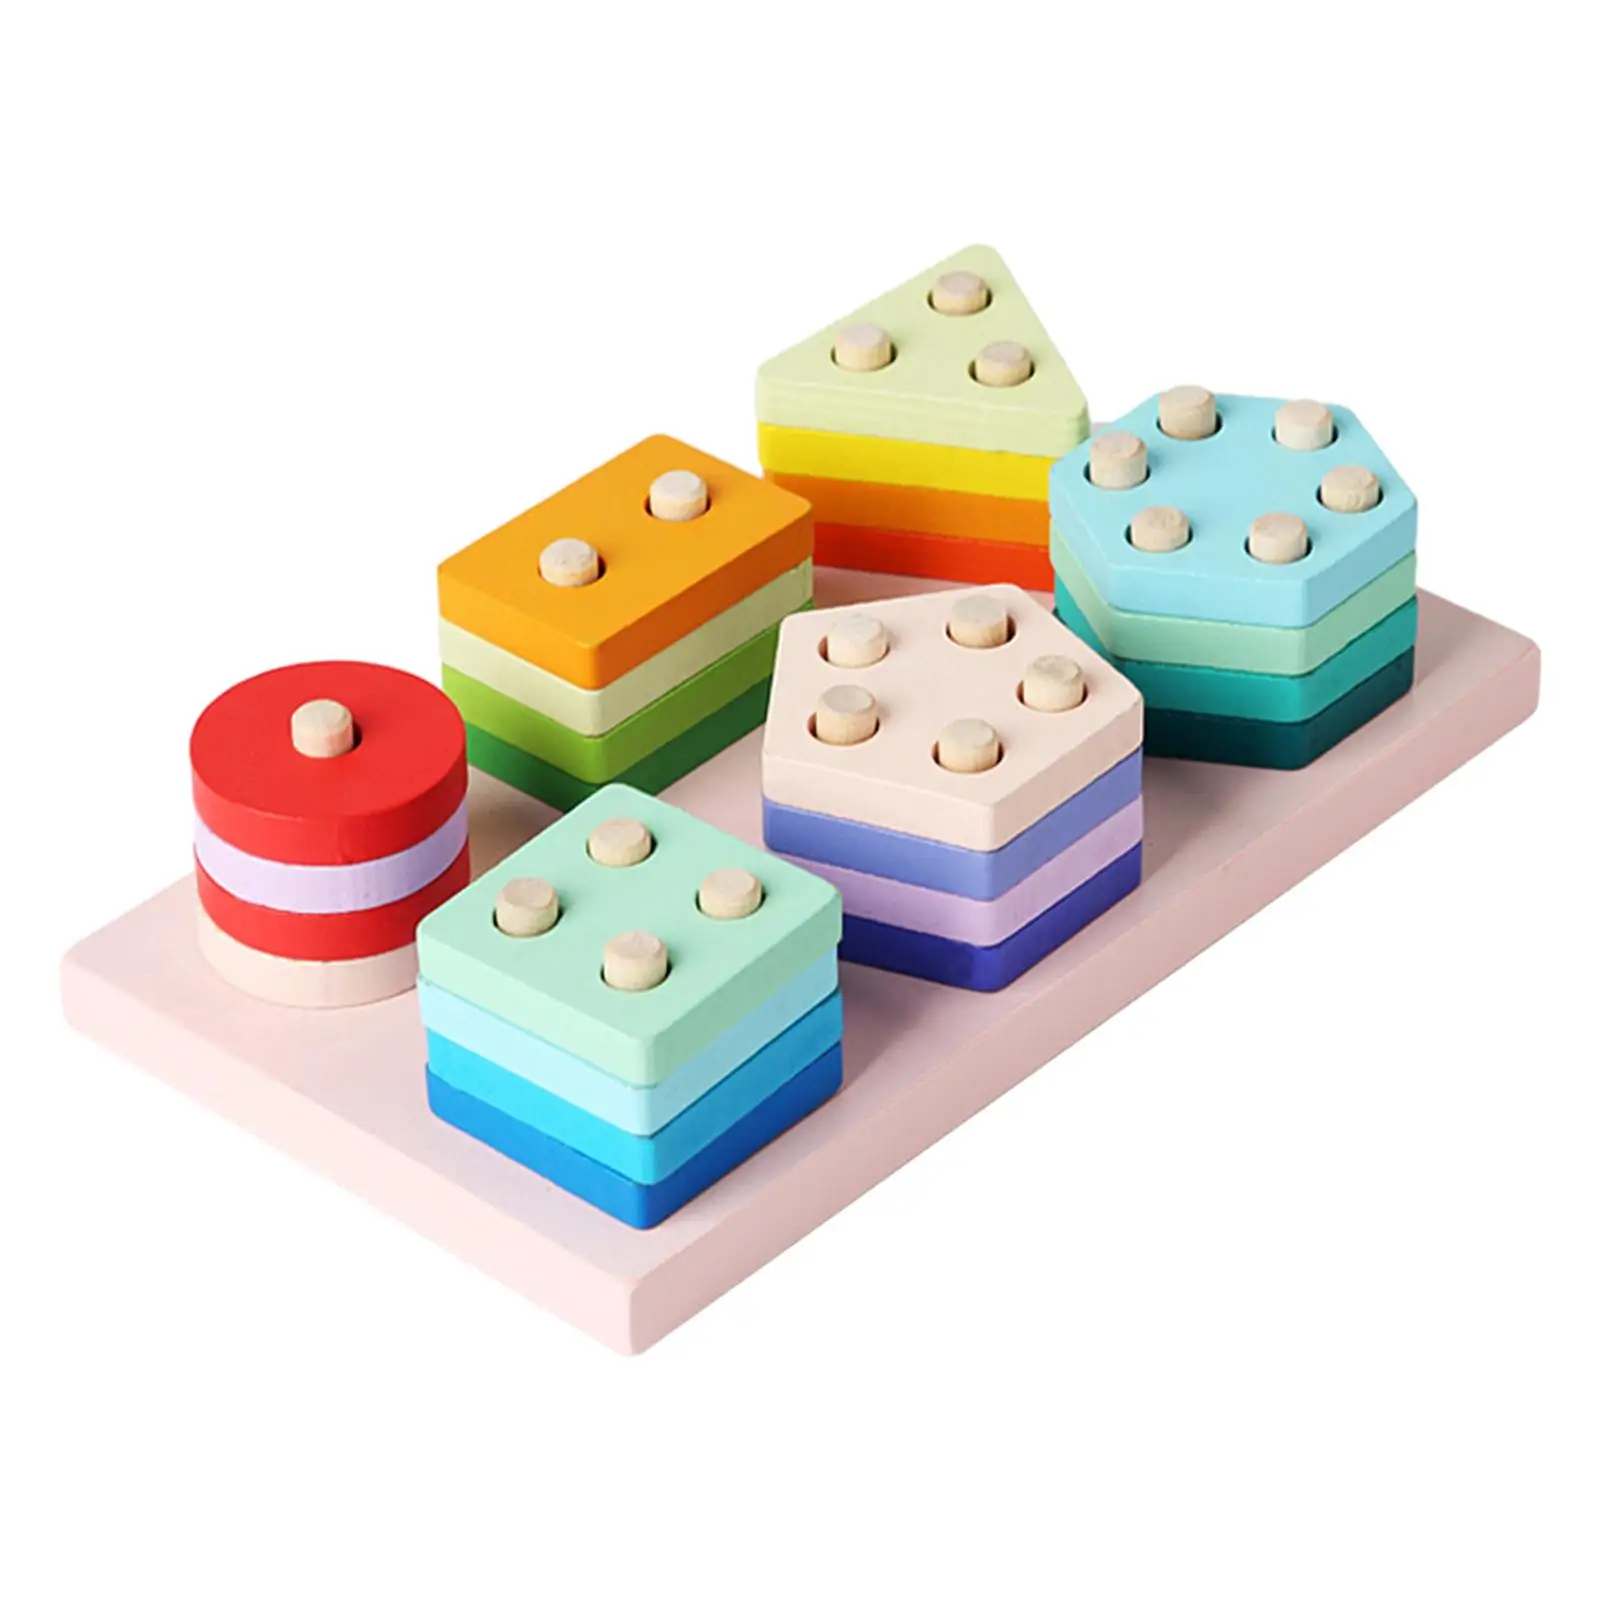 Wooden Shape Matching Puzzle Educational Toy Hand Eye Coordibation Geometric Stacker Block for Travel Toy Children Kids